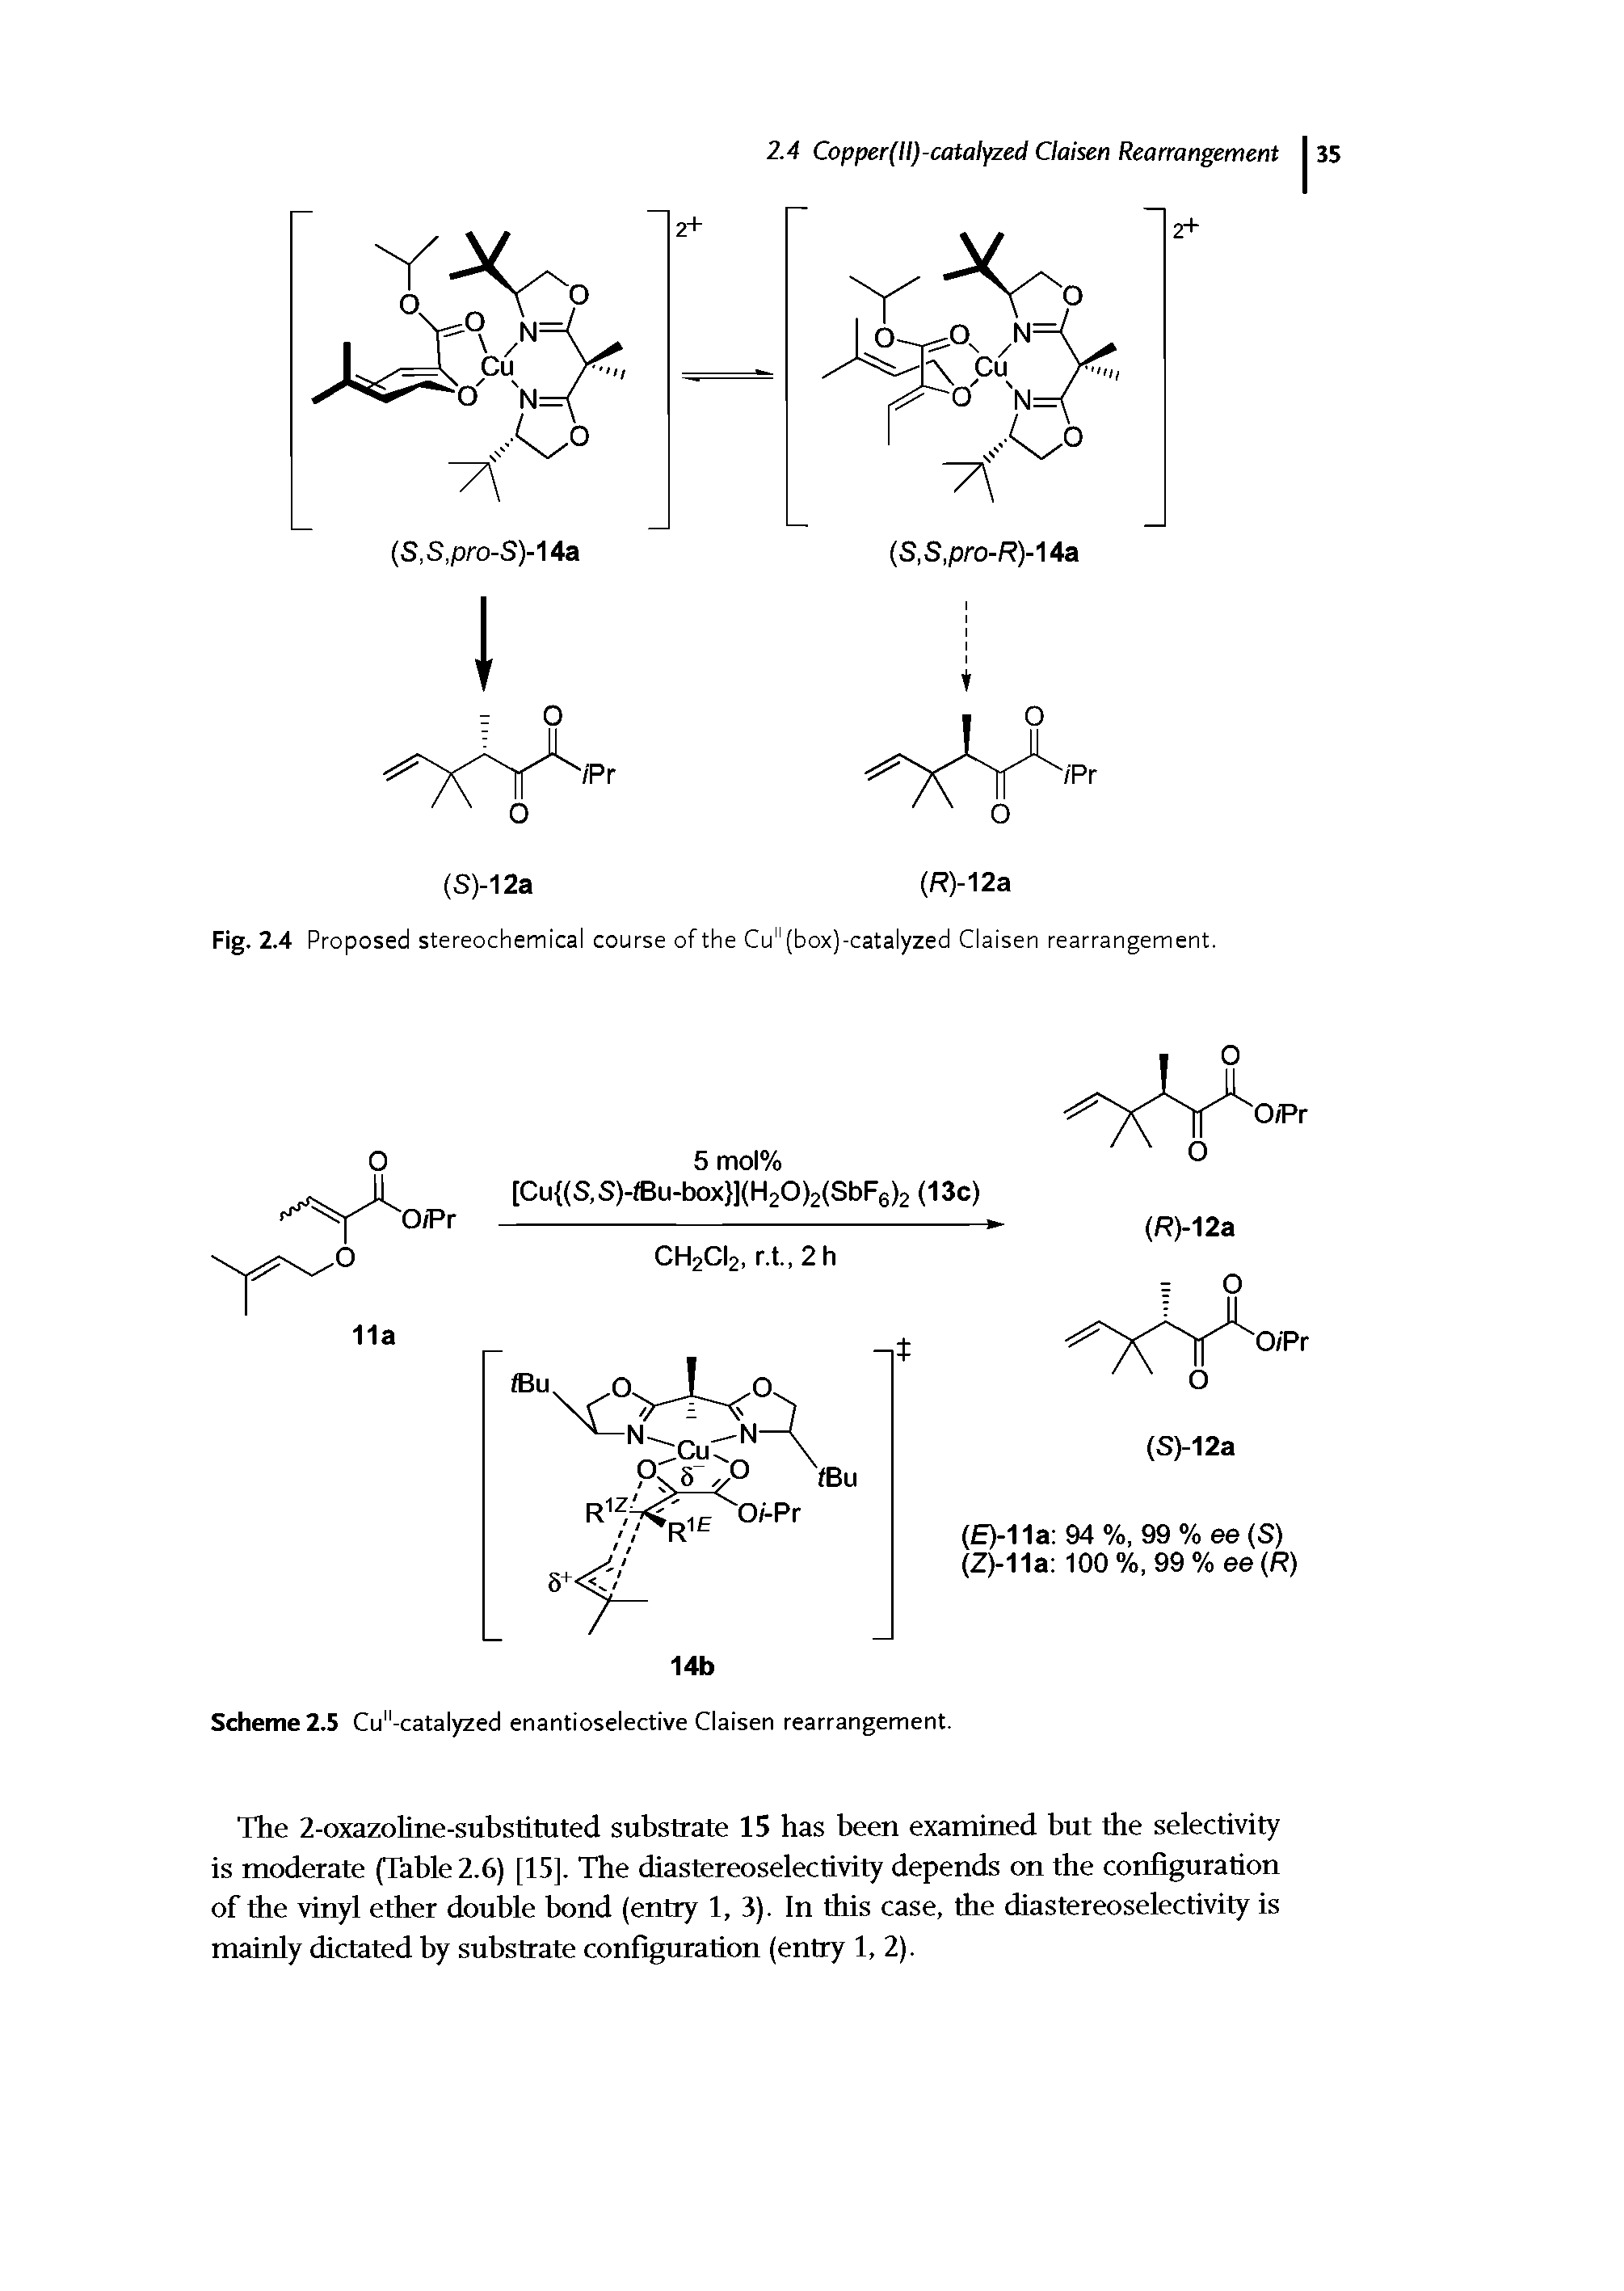 Fig. 2.4 Proposed stereochemical course of the Cu" (box)-catalyzed Claisen rearrangement.